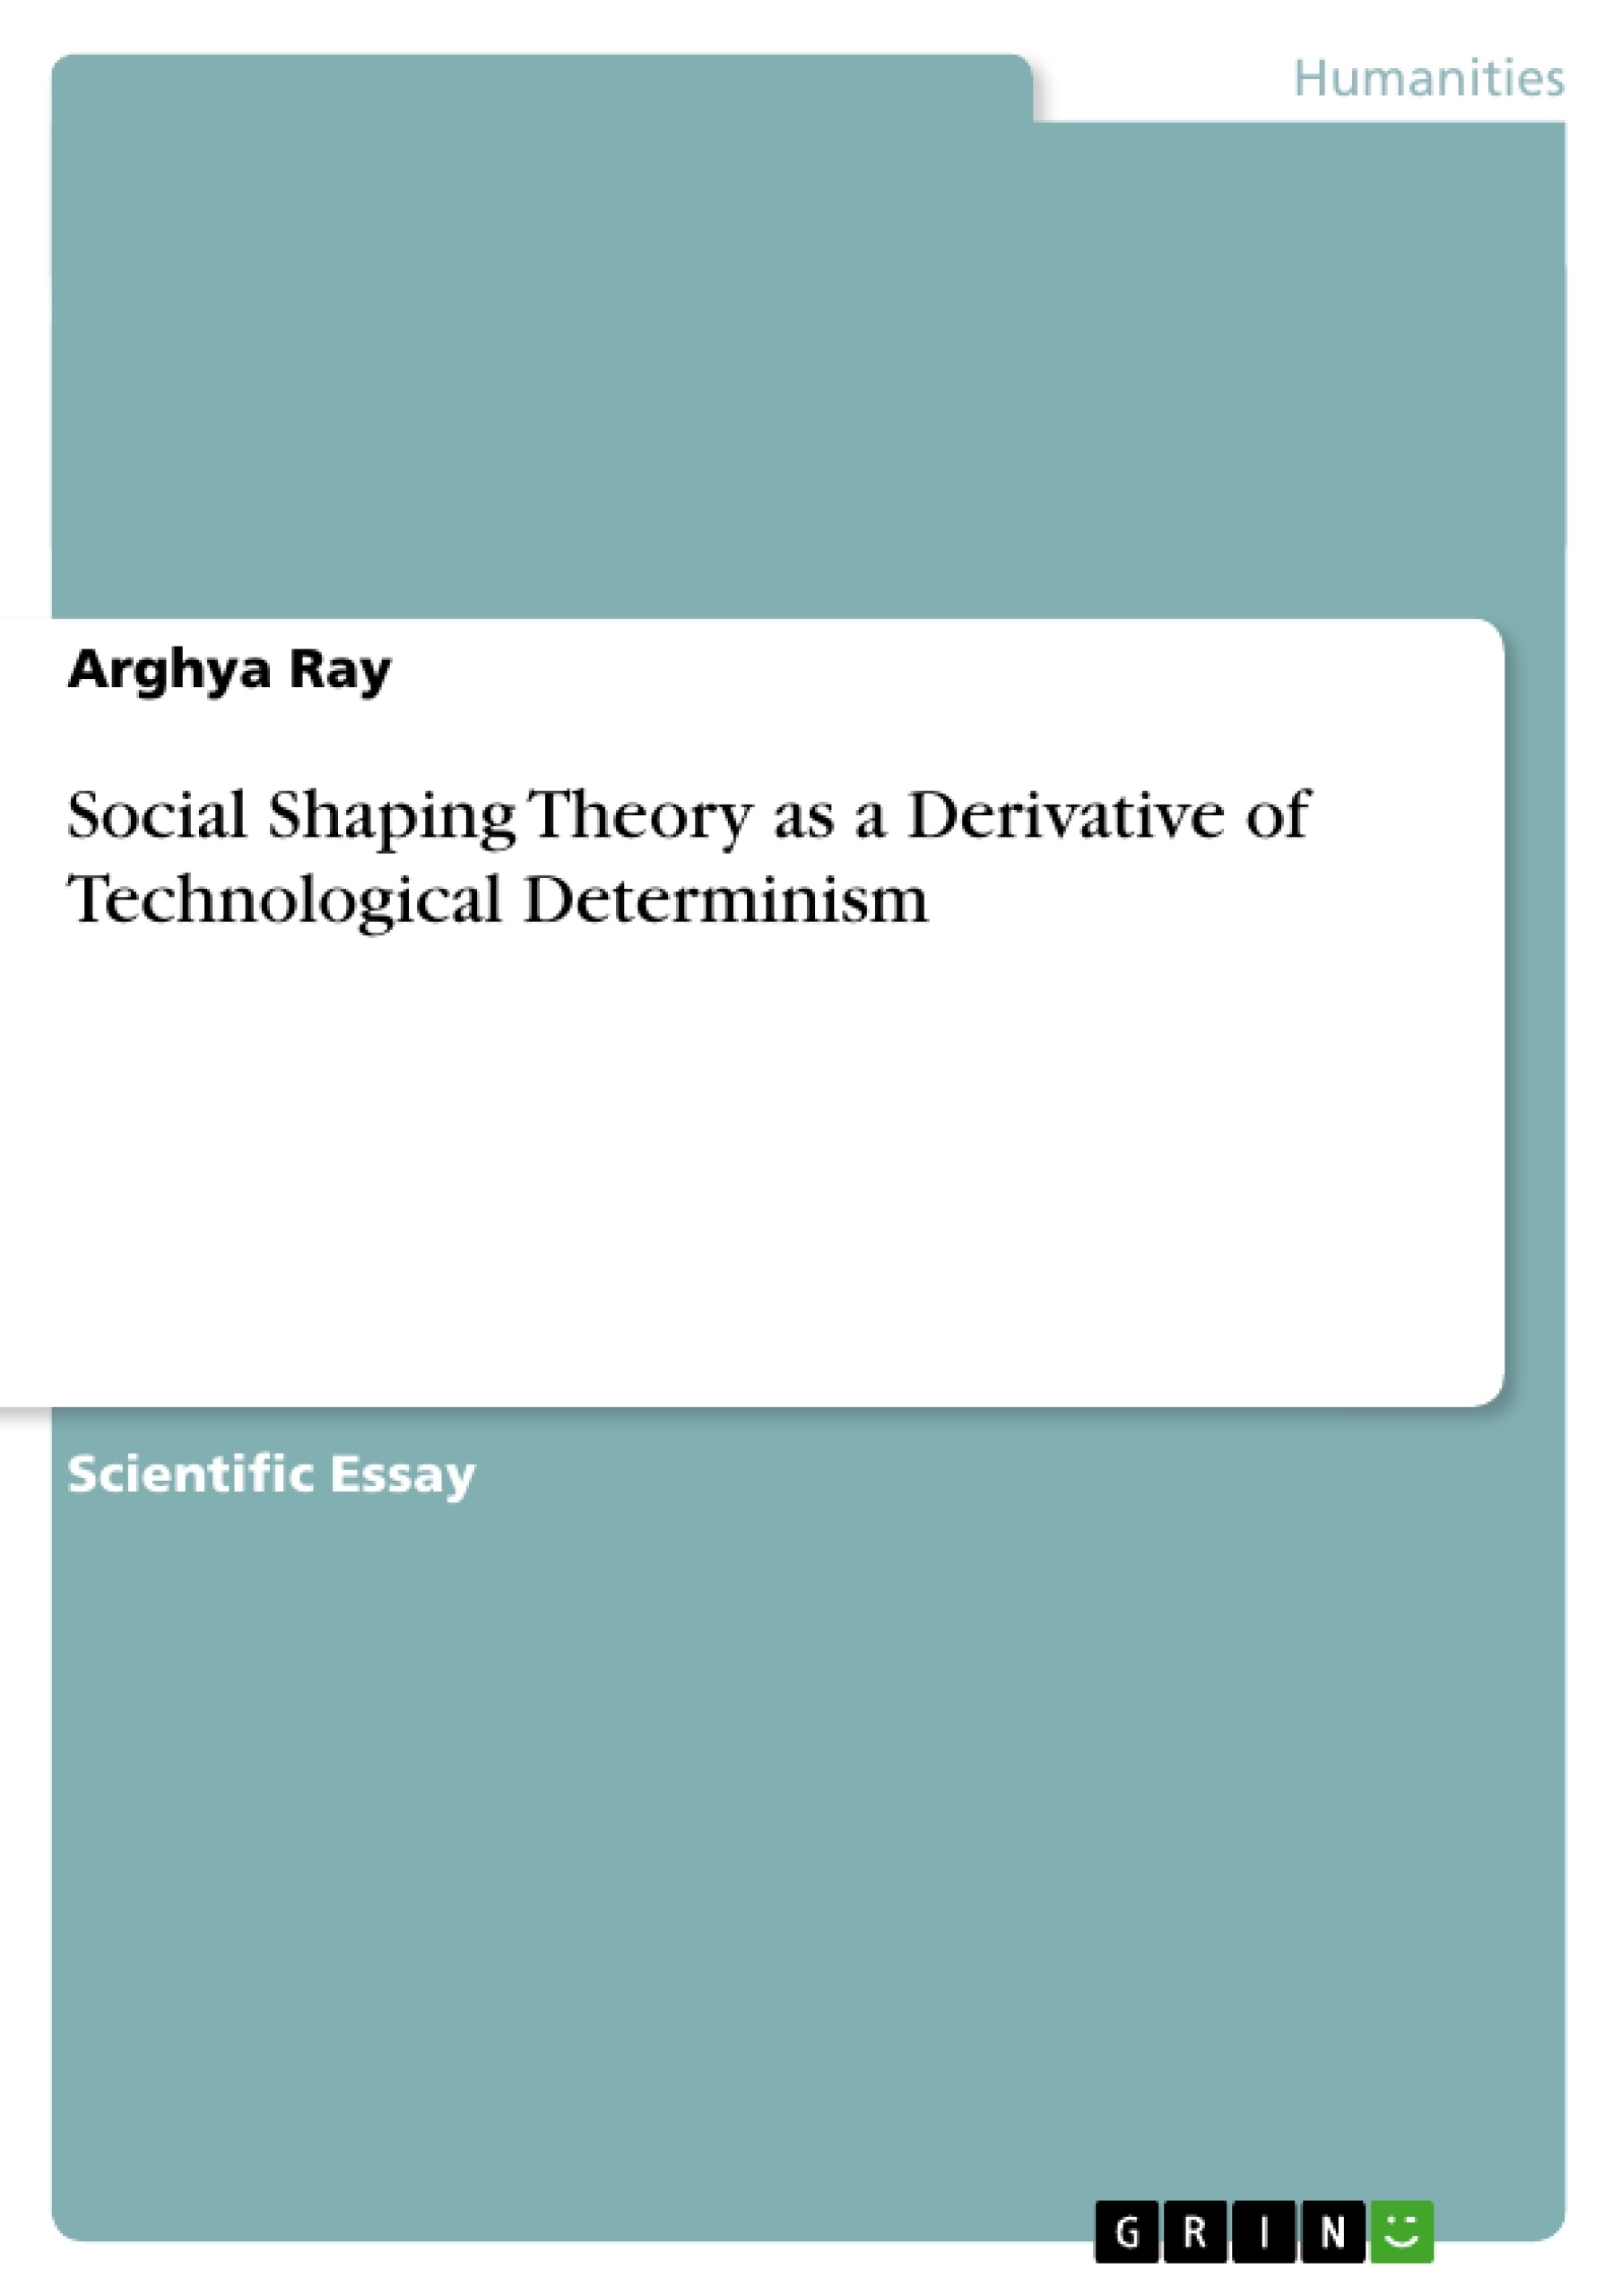 Title: Social Shaping Theory as a Derivative of Technological Determinism